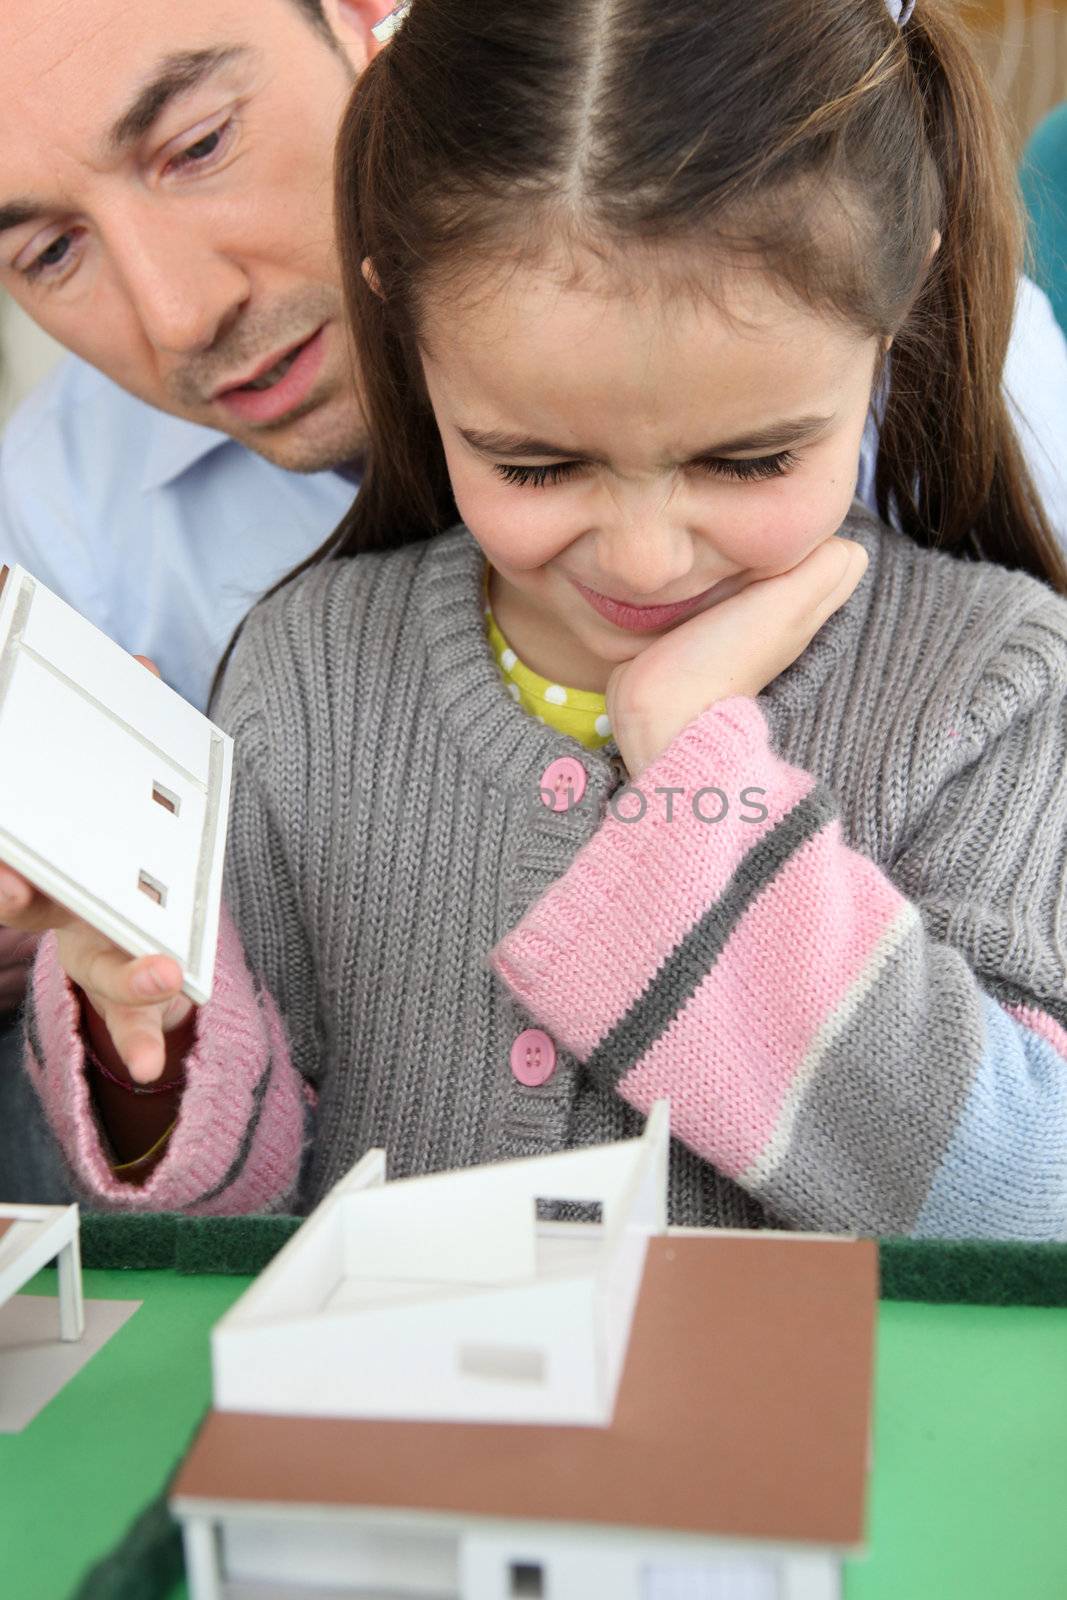 Father and daughter looking at a house model by phovoir